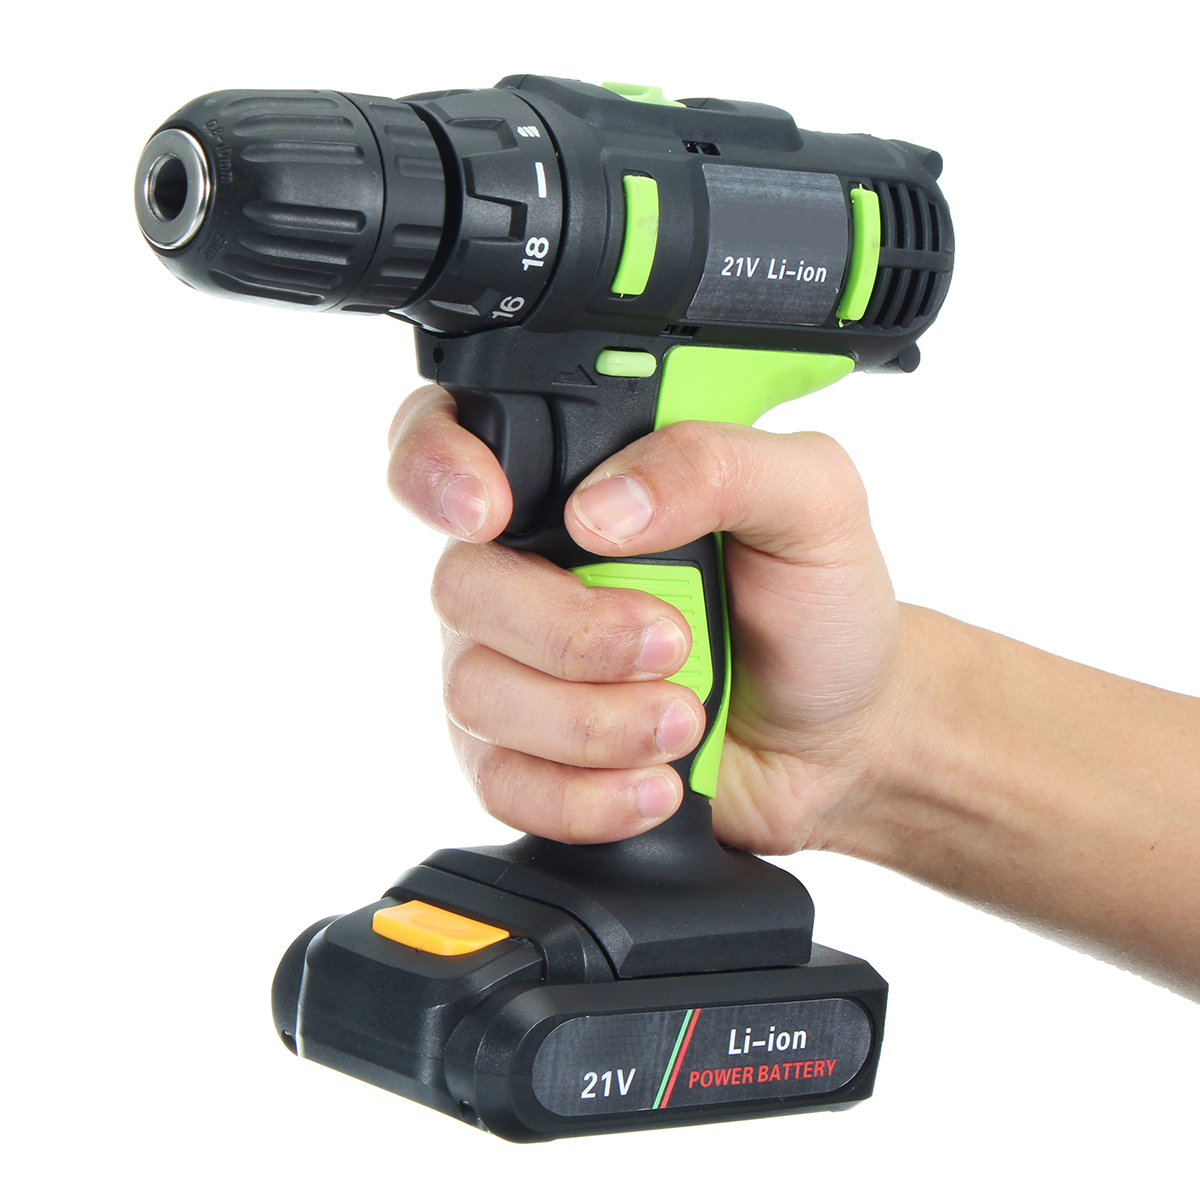 21V-Li-ion-Electric-Screwdriver-Rechargeable-Electric-Charging-Power-Drill-Two-Speed-30-45Nm-1256491-8